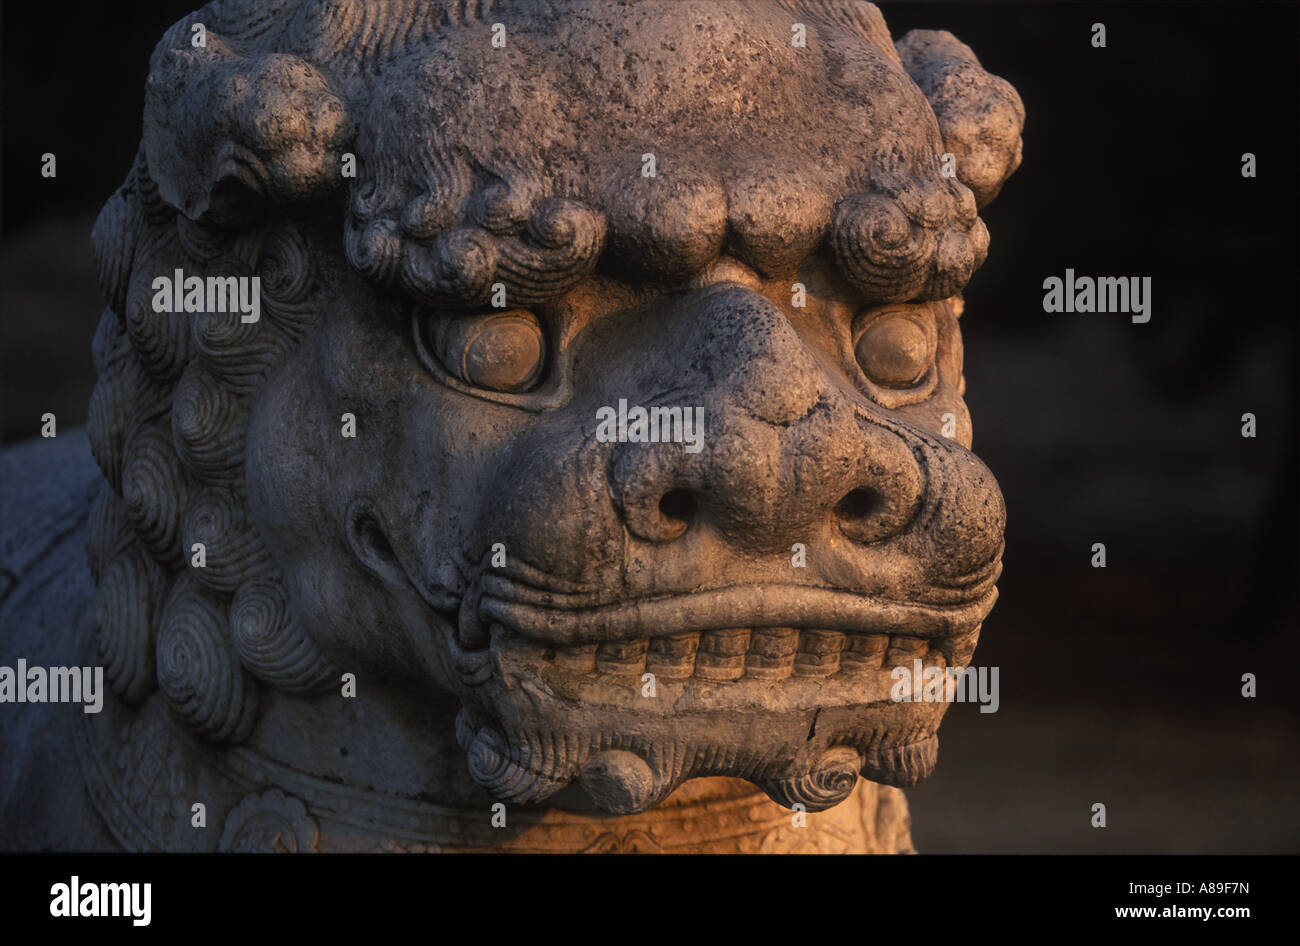 Sculpture at the Ming graves in the North of Peking, China Stock Photo